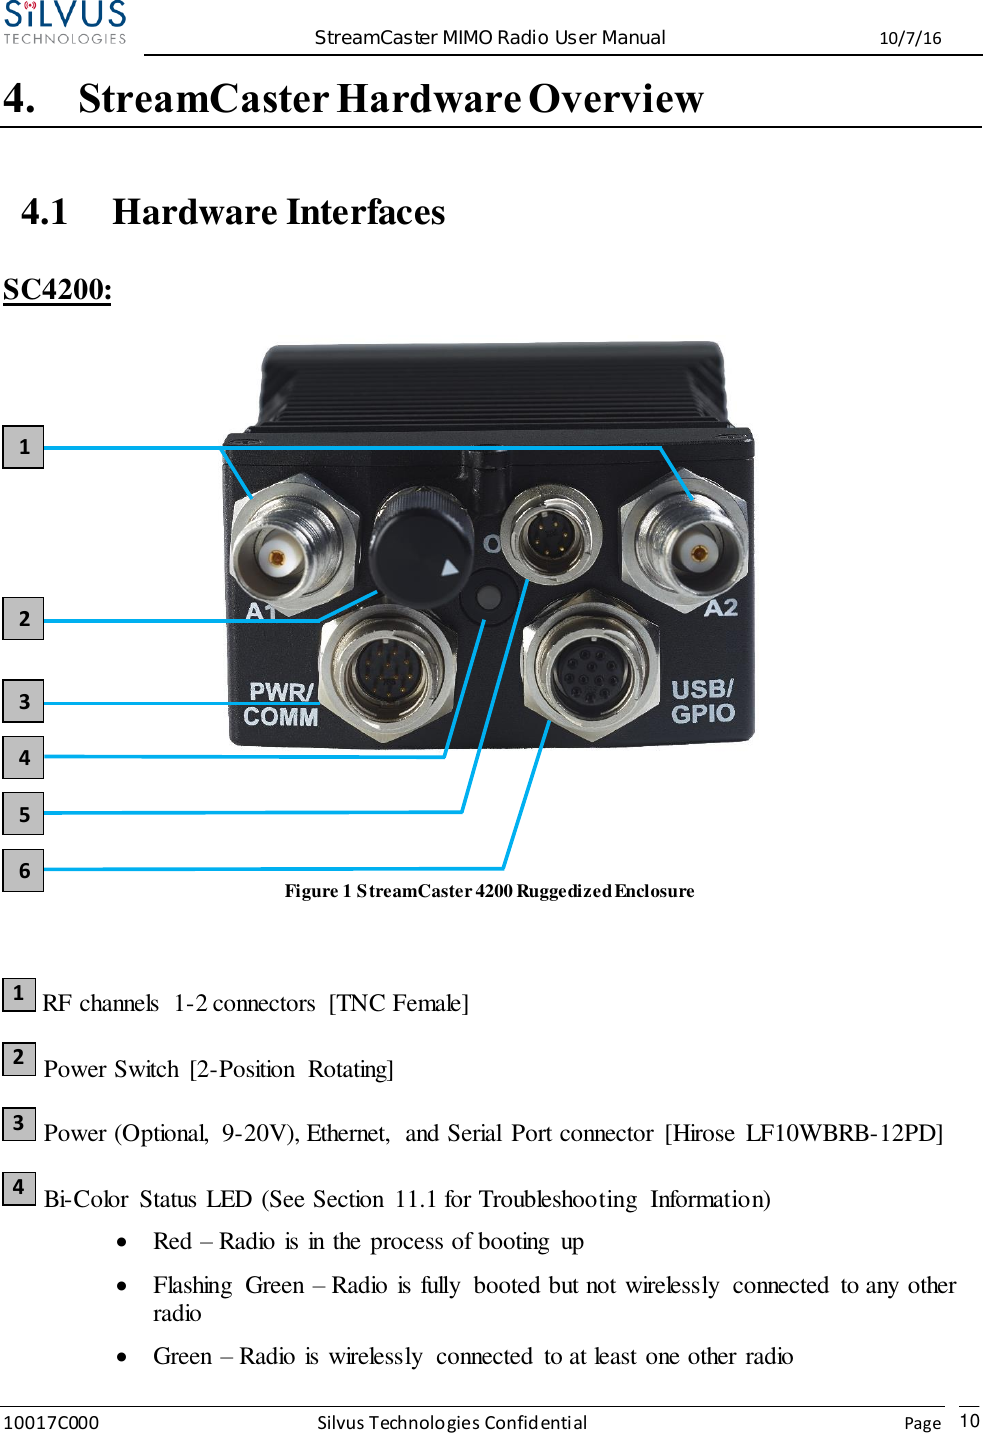  StreamCaster MIMO Radio User Manual  10/7/16 10017C000 Silvus Technologies Confidential    Page   10 4. StreamCaster Hardware Overview 4.1 Hardware Interfaces SC4200:     Figure 1 StreamCaster 4200 Ruggedized Enclosure   RF channels  1-2 connectors  [TNC Female]  Power Switch  [2-Position  Rotating]  Power (Optional,  9-20V), Ethernet,  and Serial  Port connector  [Hirose  LF10WBRB-12PD]  Bi-Color  Status LED (See Section  11.1 for Troubleshooting  Information)  Red – Radio is in the process of booting  up  Flashing  Green – Radio is fully  booted but not wirelessly  connected  to any other radio  Green – Radio is wirelessly  connected  to at least one other radio 1 2 3 4 1 3 5 4 6 2 